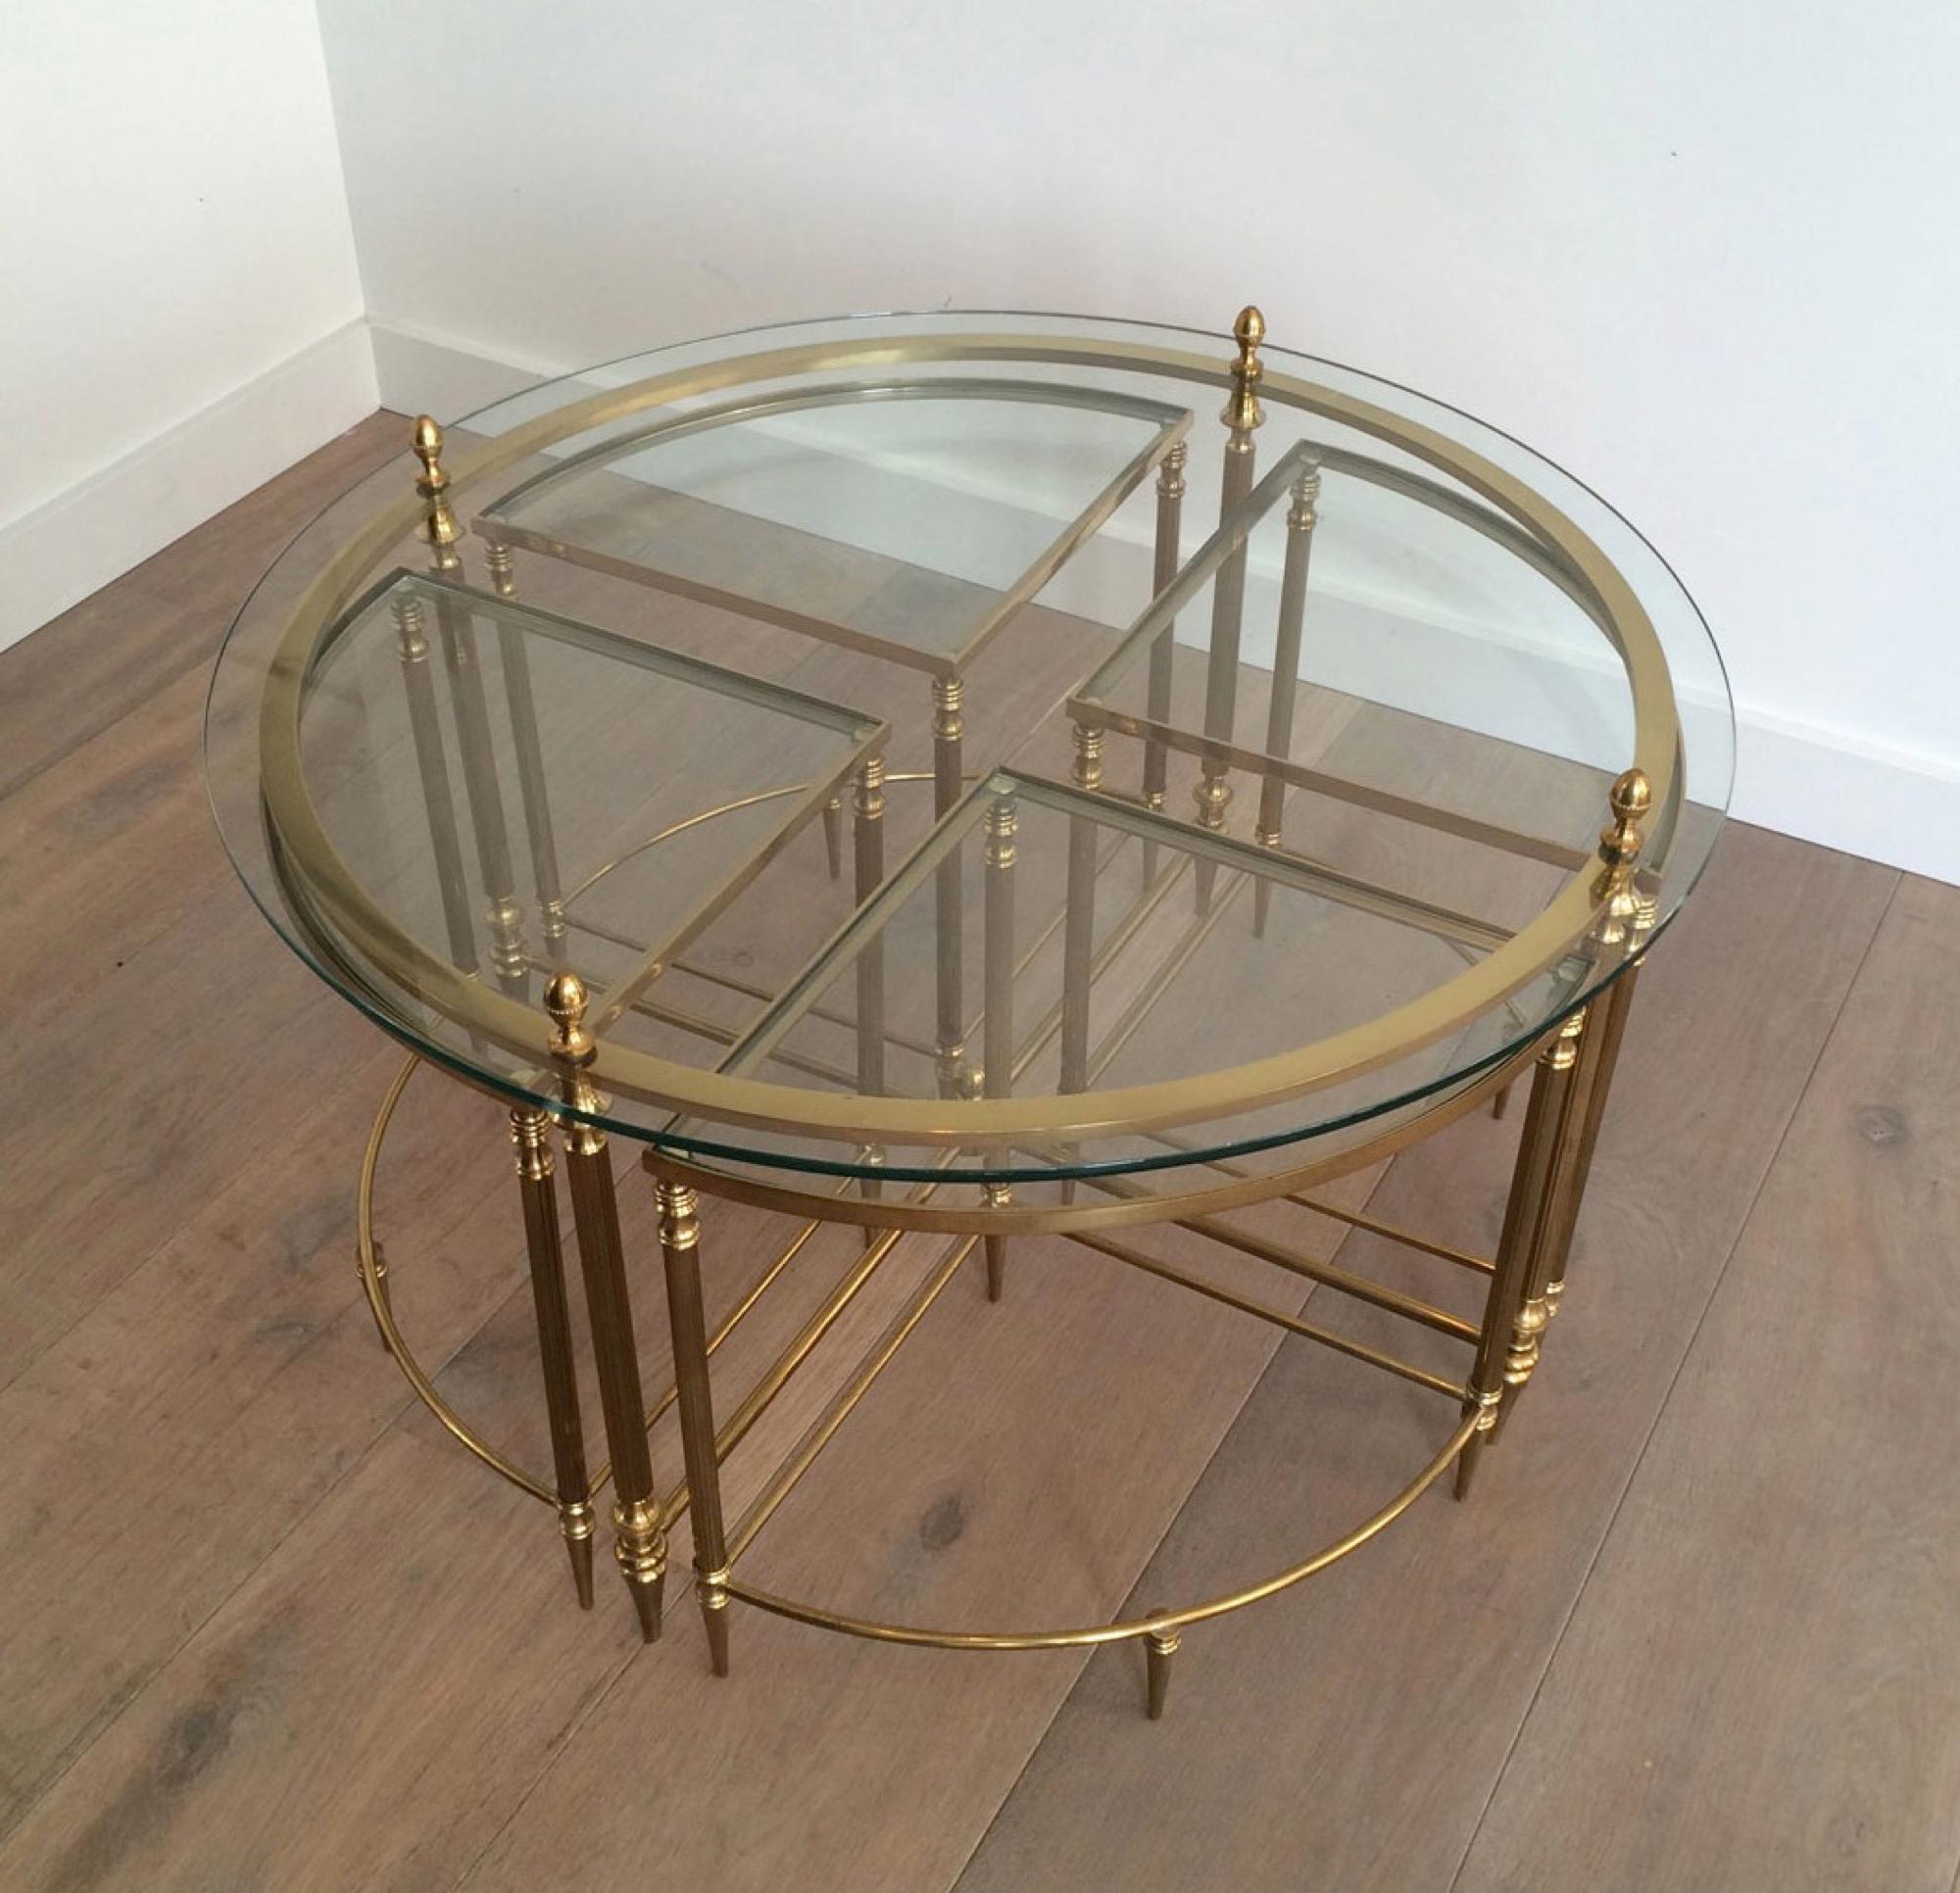 This very nice neoclassical round coffee table is made of brass with a round glass top. Four corner nesting tables can slide under the main table. These corner tables are also made of brass with glass tops and can be used to enlarge the main table